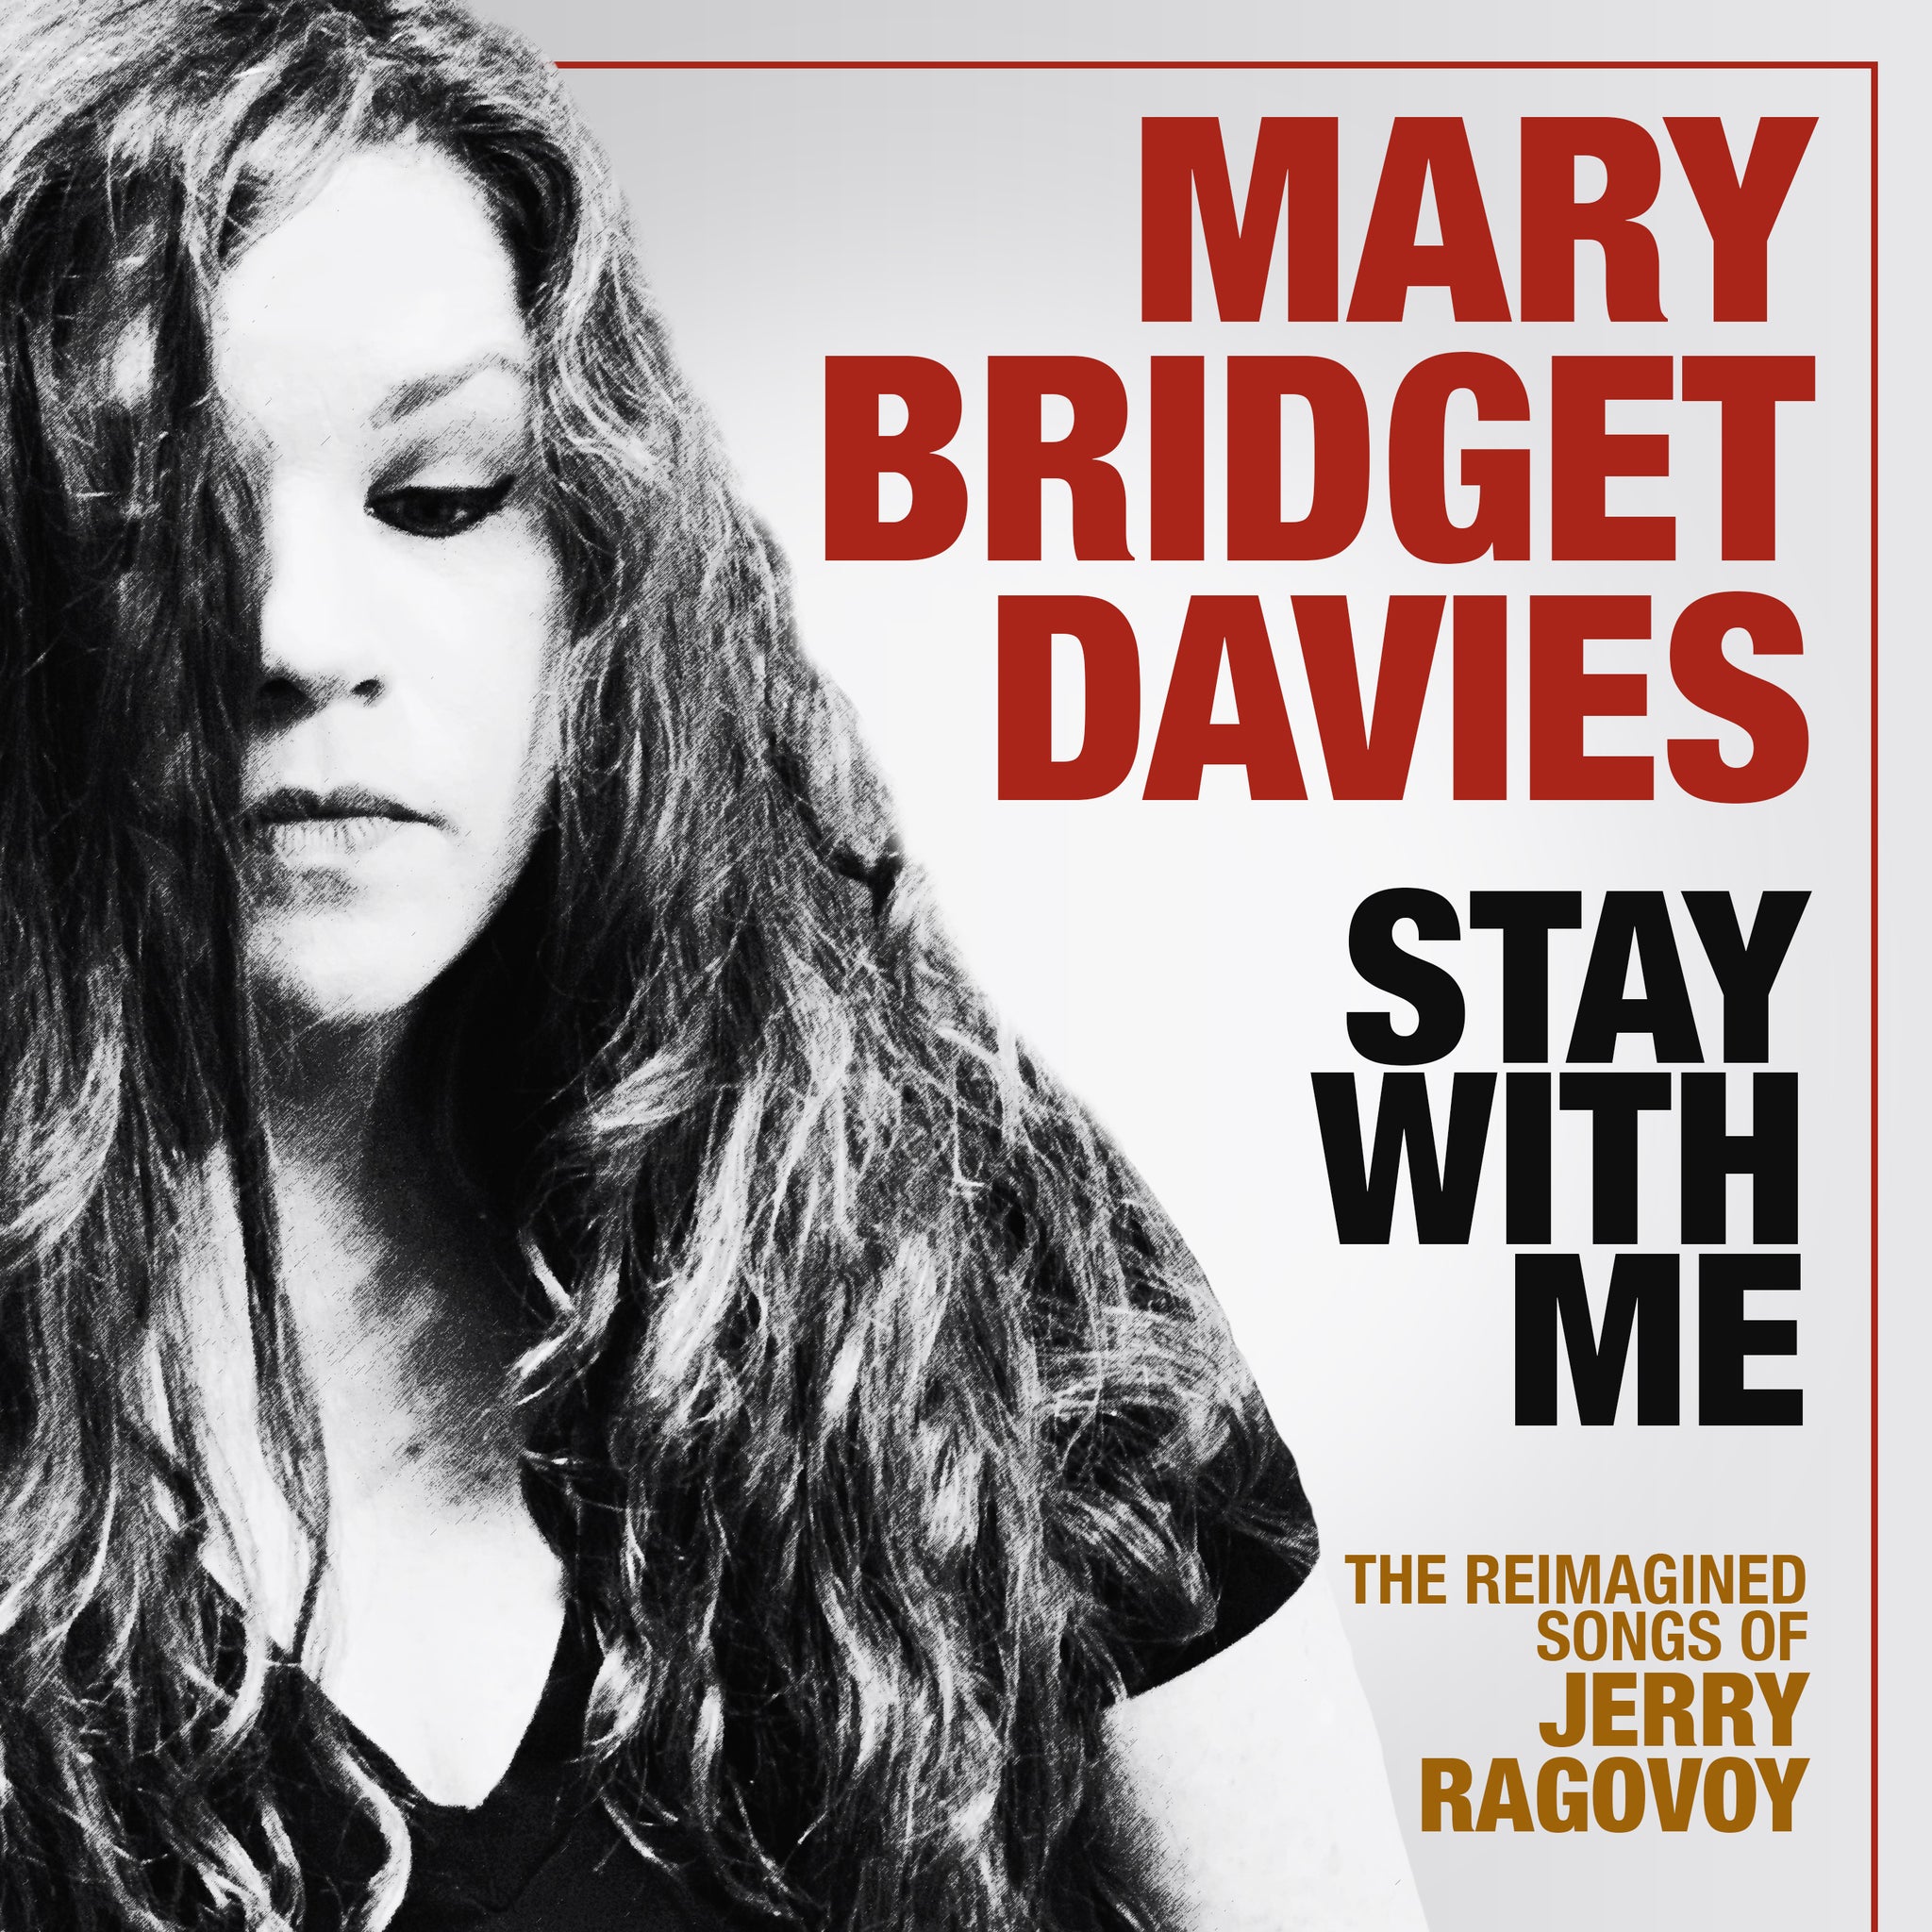 Mary Bridget Davies: Stay With Me - The Reimagined Songs of Jerry Ragovoy [CD]